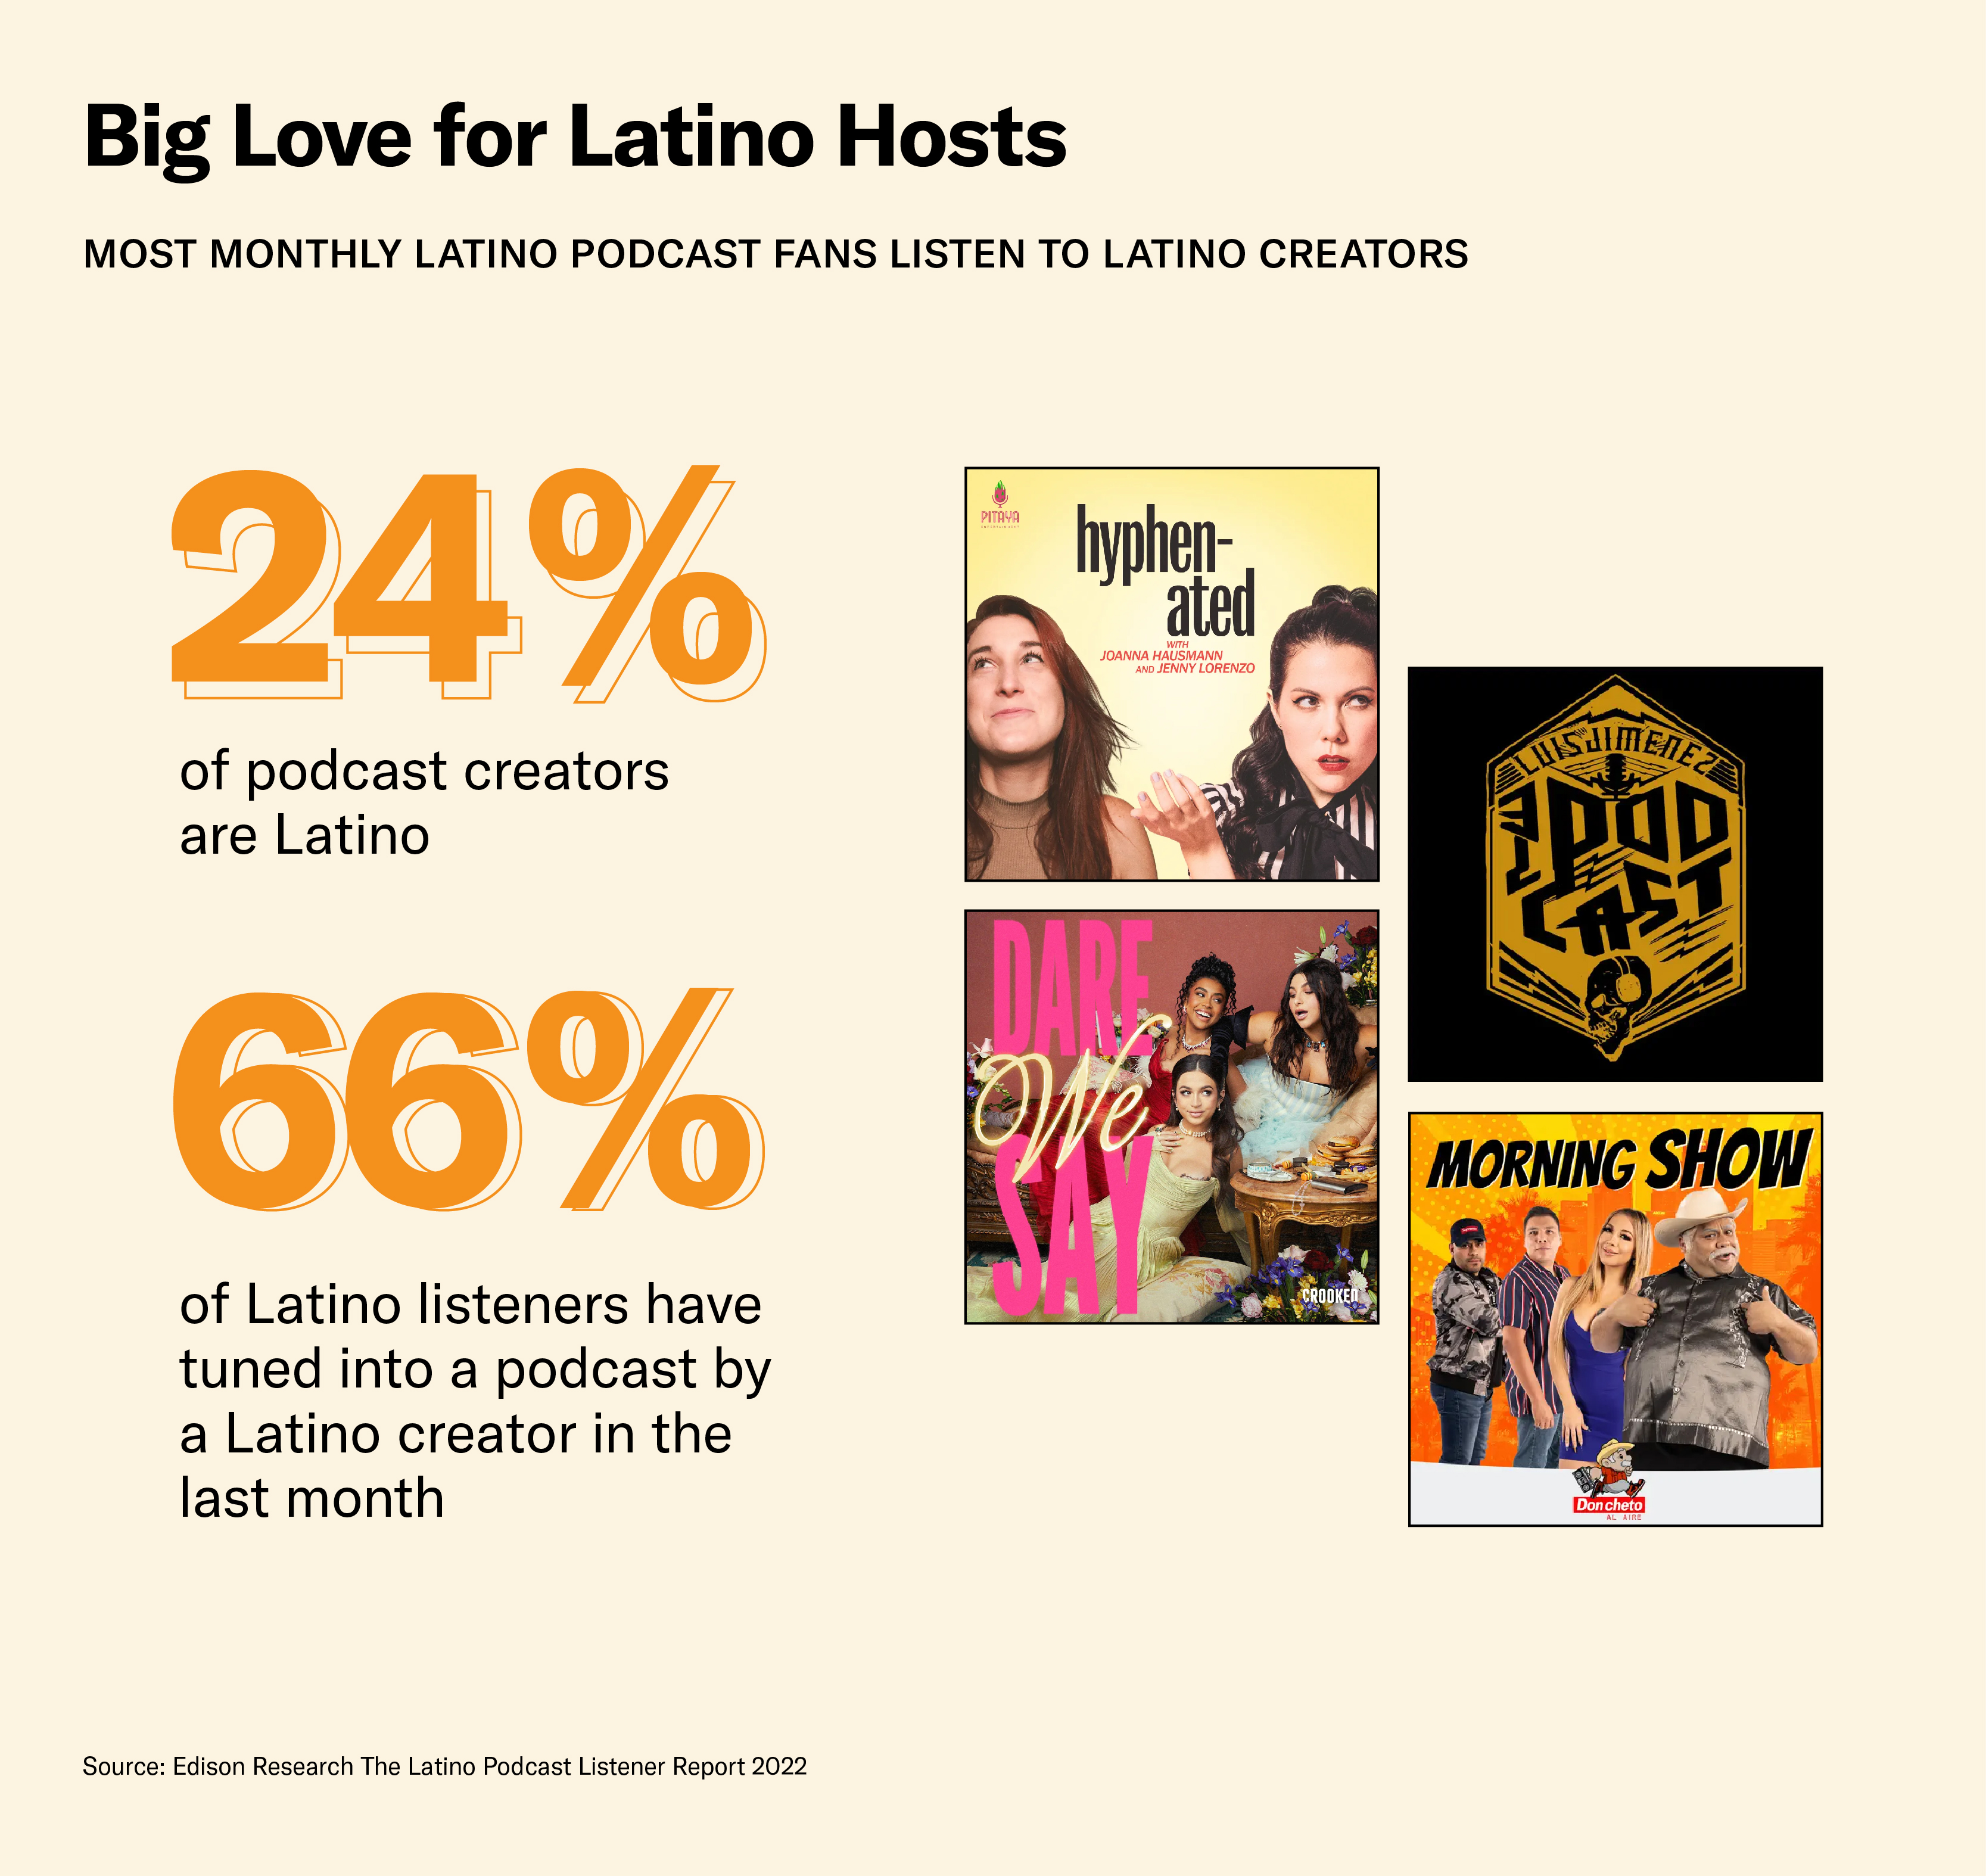 Latino podcast listeners seek content from Latino podcast hosts